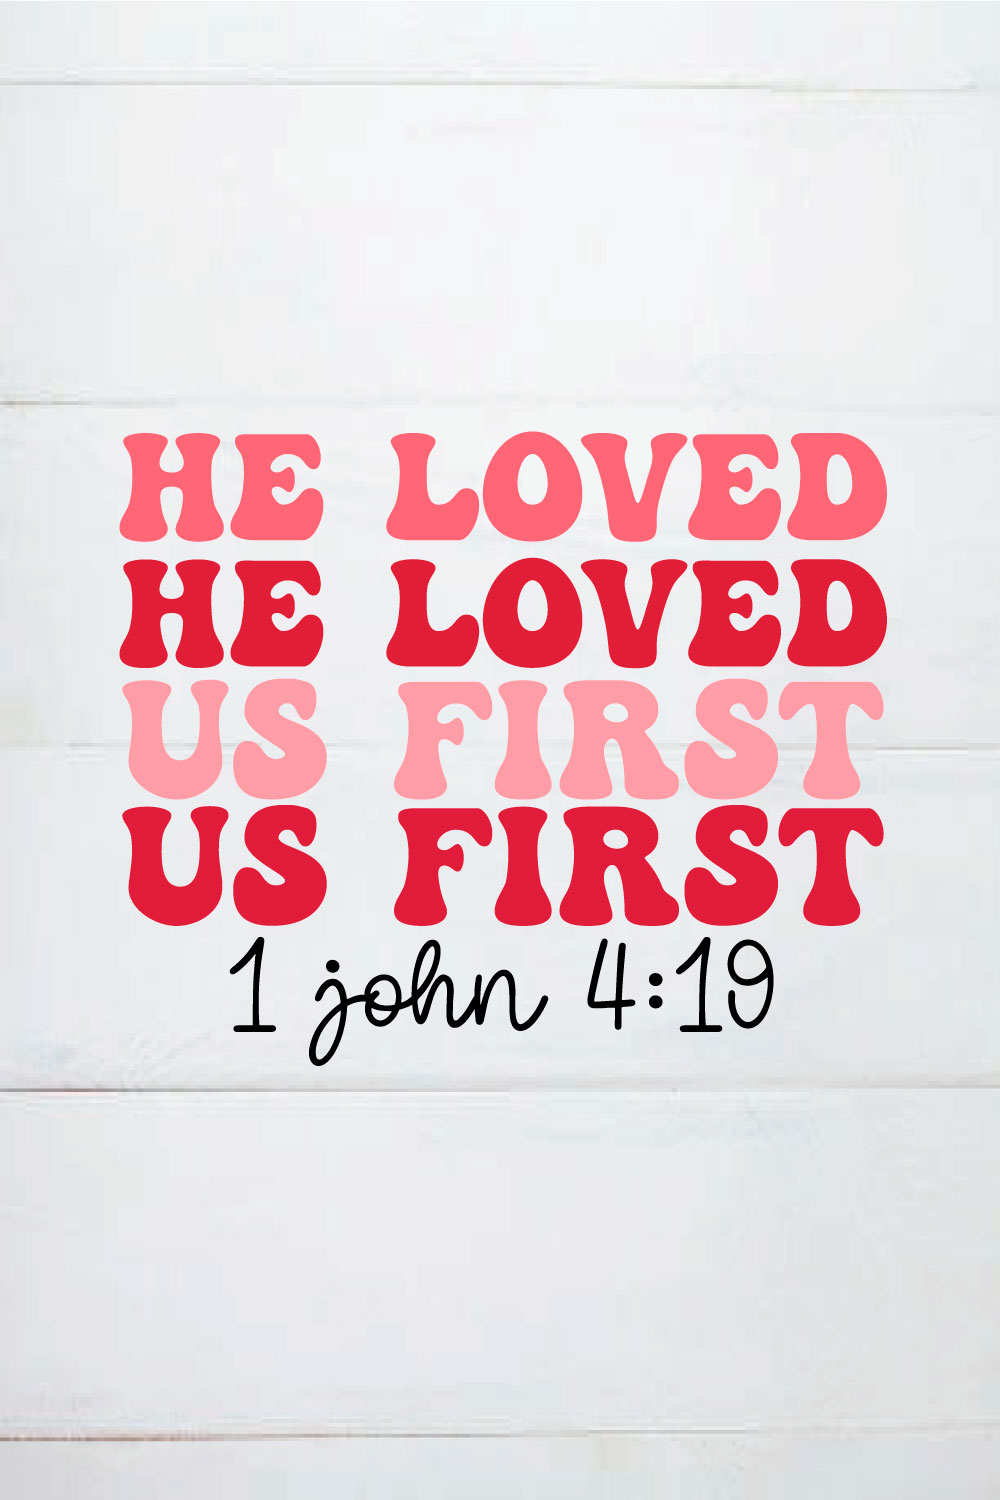 we love because he first loved us 1 john 4:19 retro pinterest preview image.